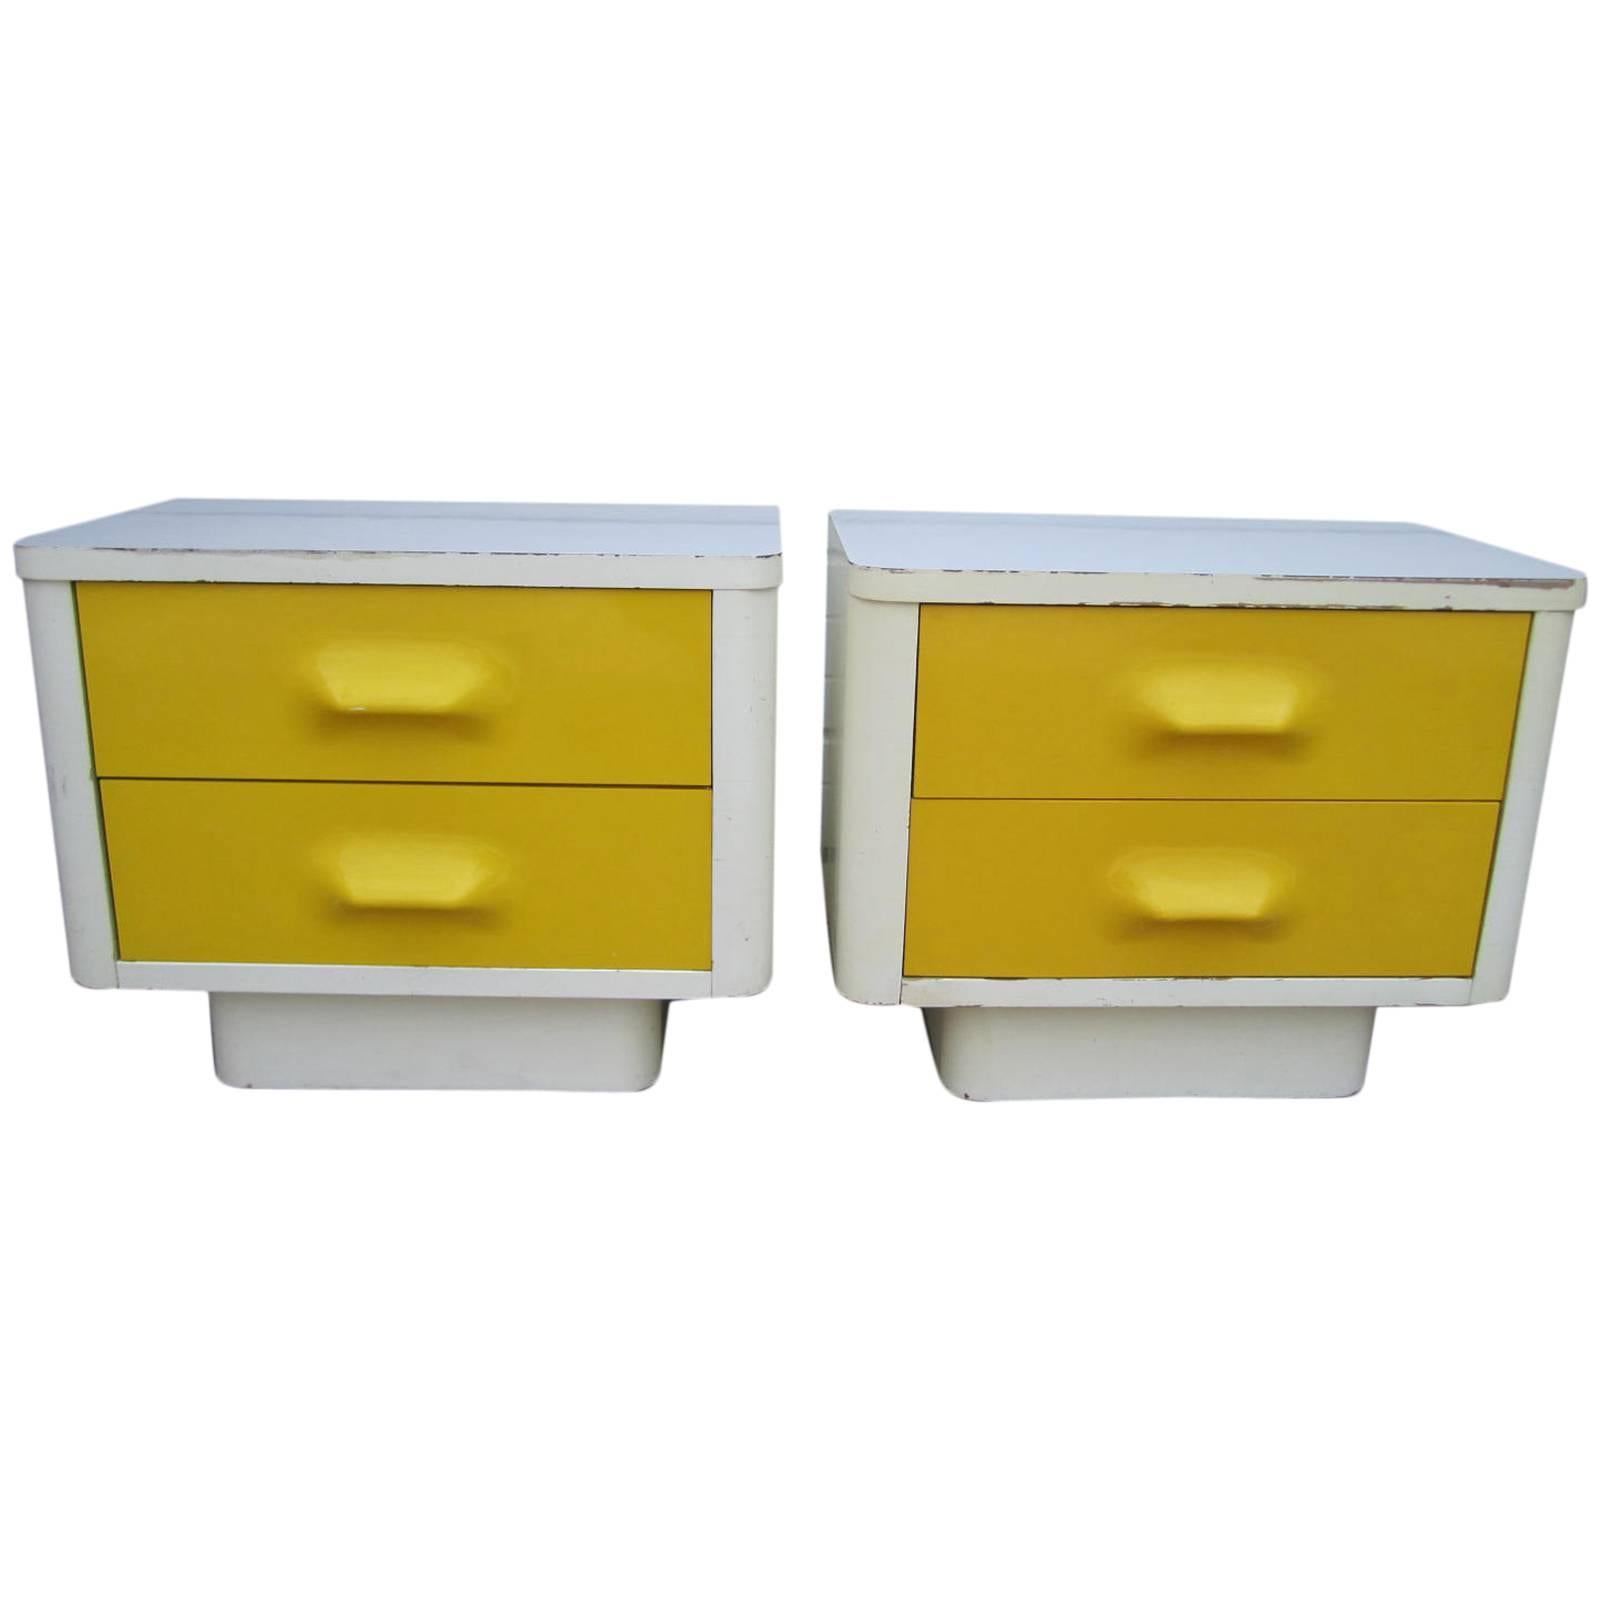 Fun Pair of Chapter One Broyhill Yellow Nightstands Mid-Century Modern